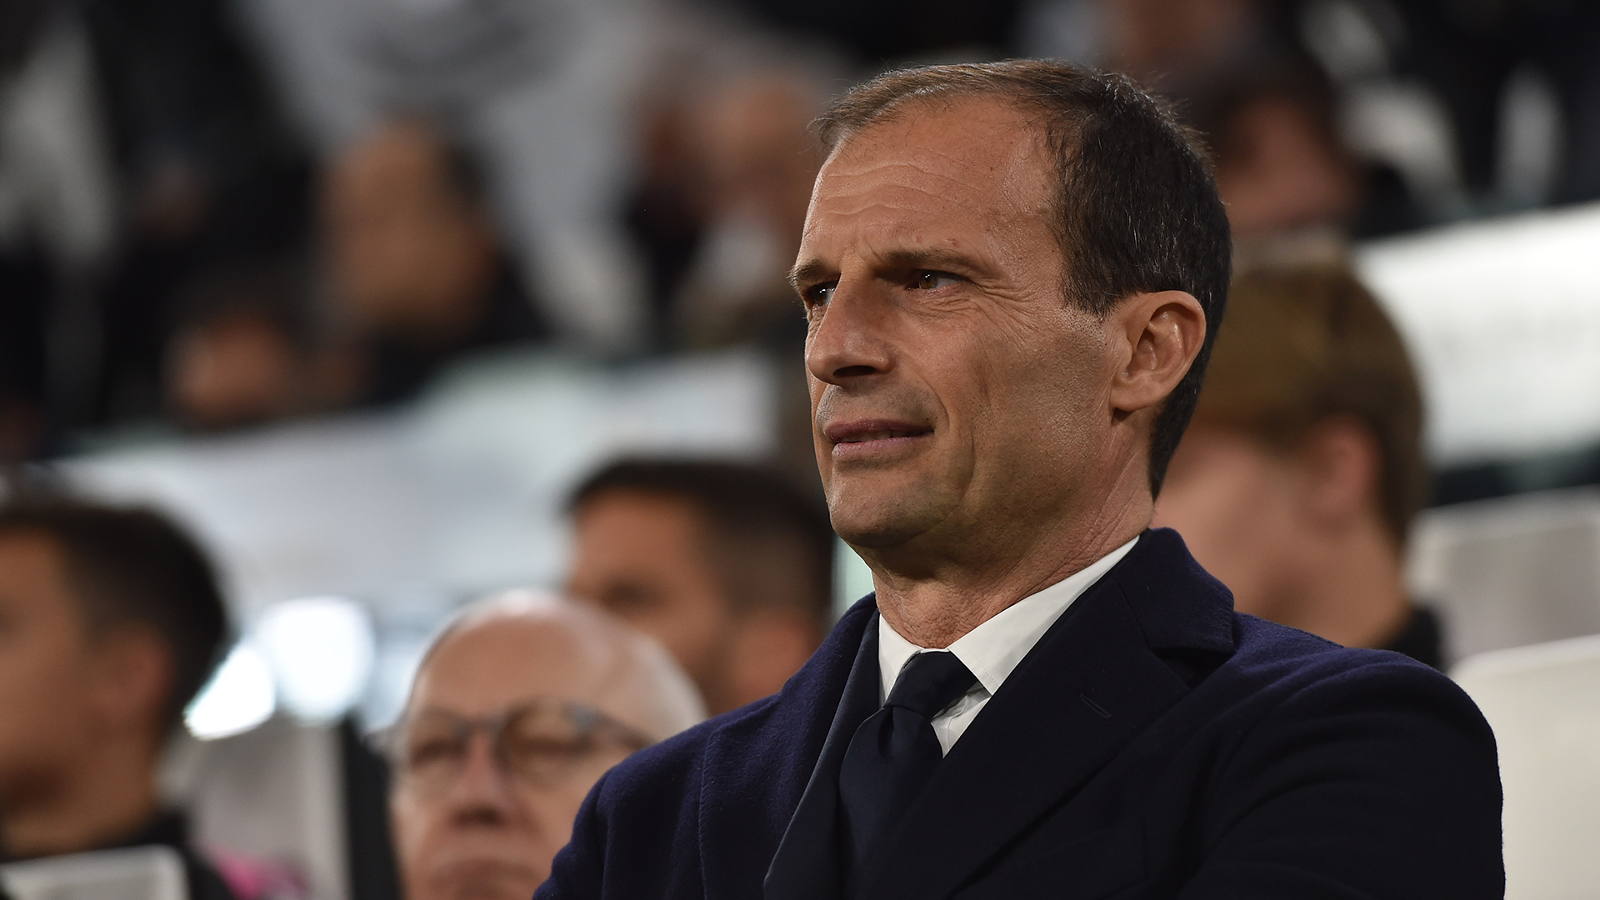 'If I was Allegri, I'd go to Manchester United': Fabio Capello urges former Juventus boss to hold out for shot at Old Trafford - Bóng Đá